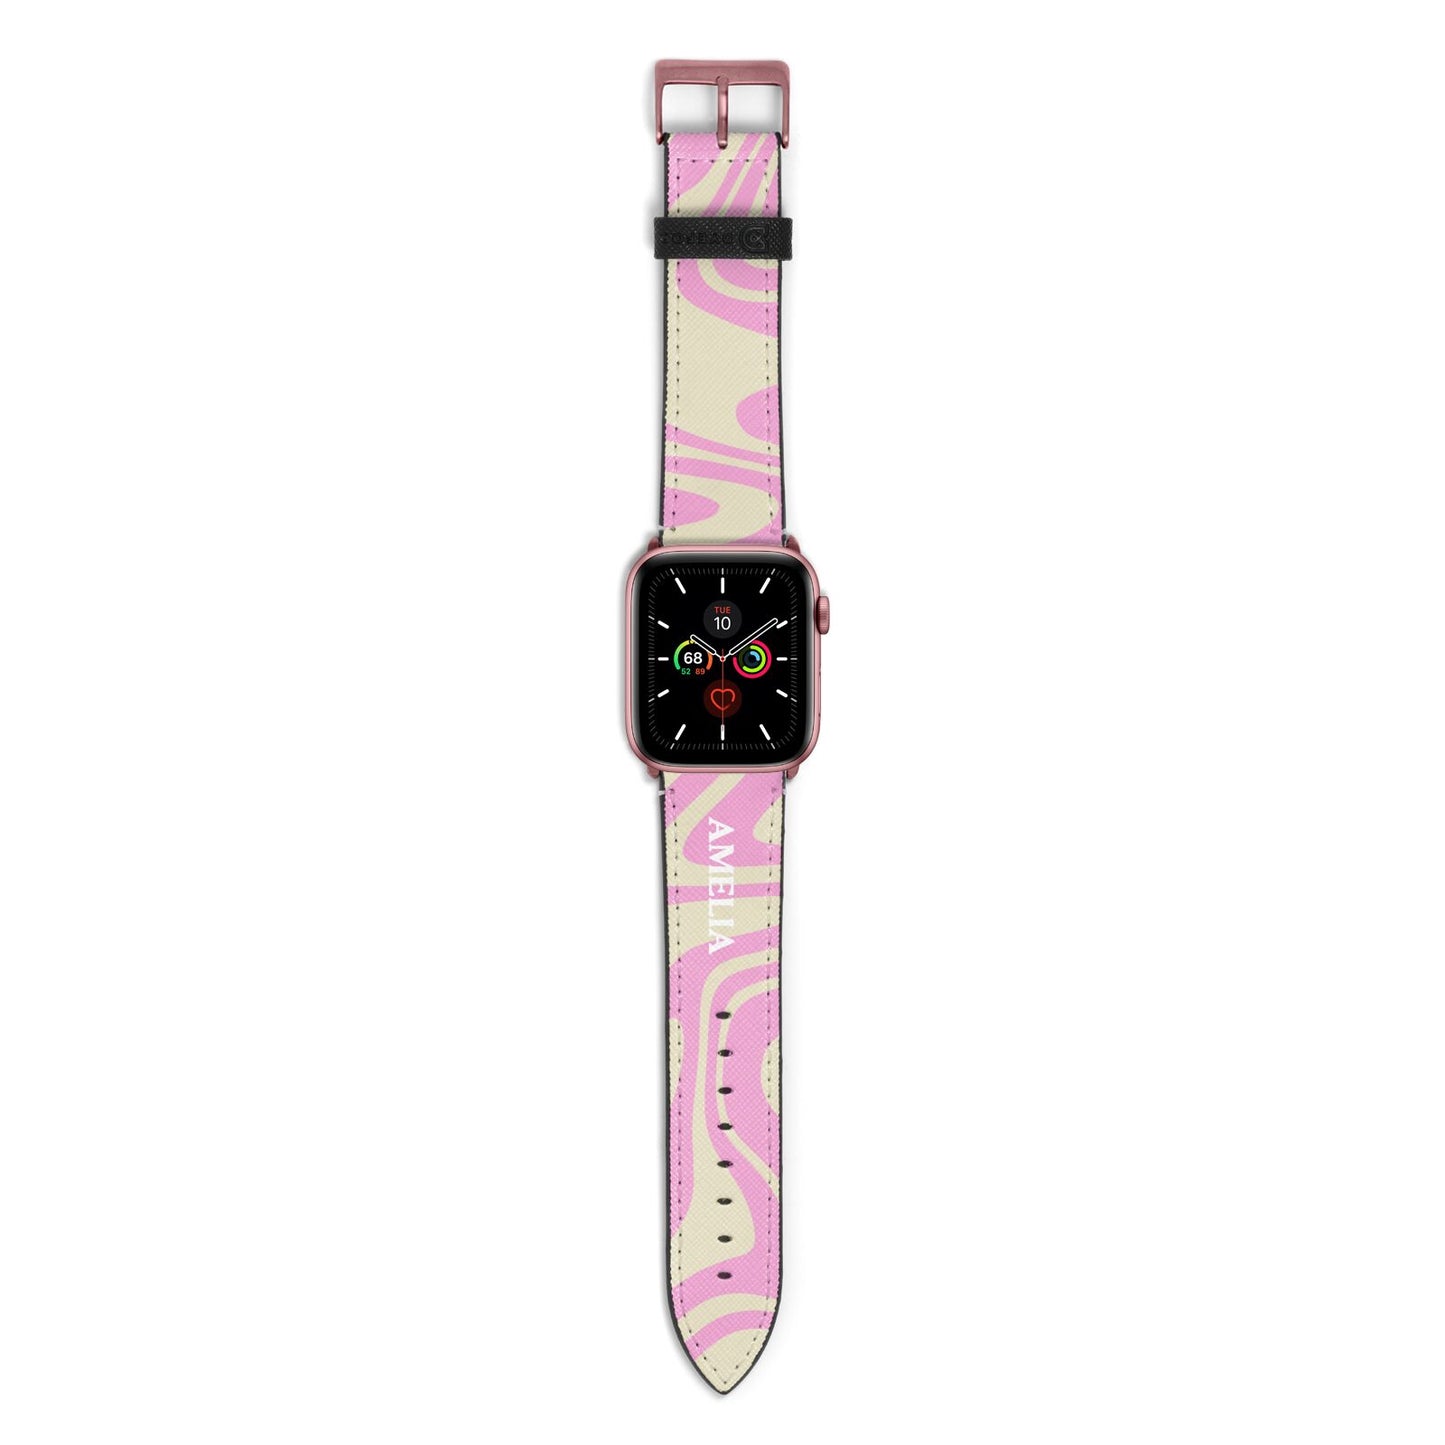 Custom Seventies Apple Watch Strap with Rose Gold Hardware